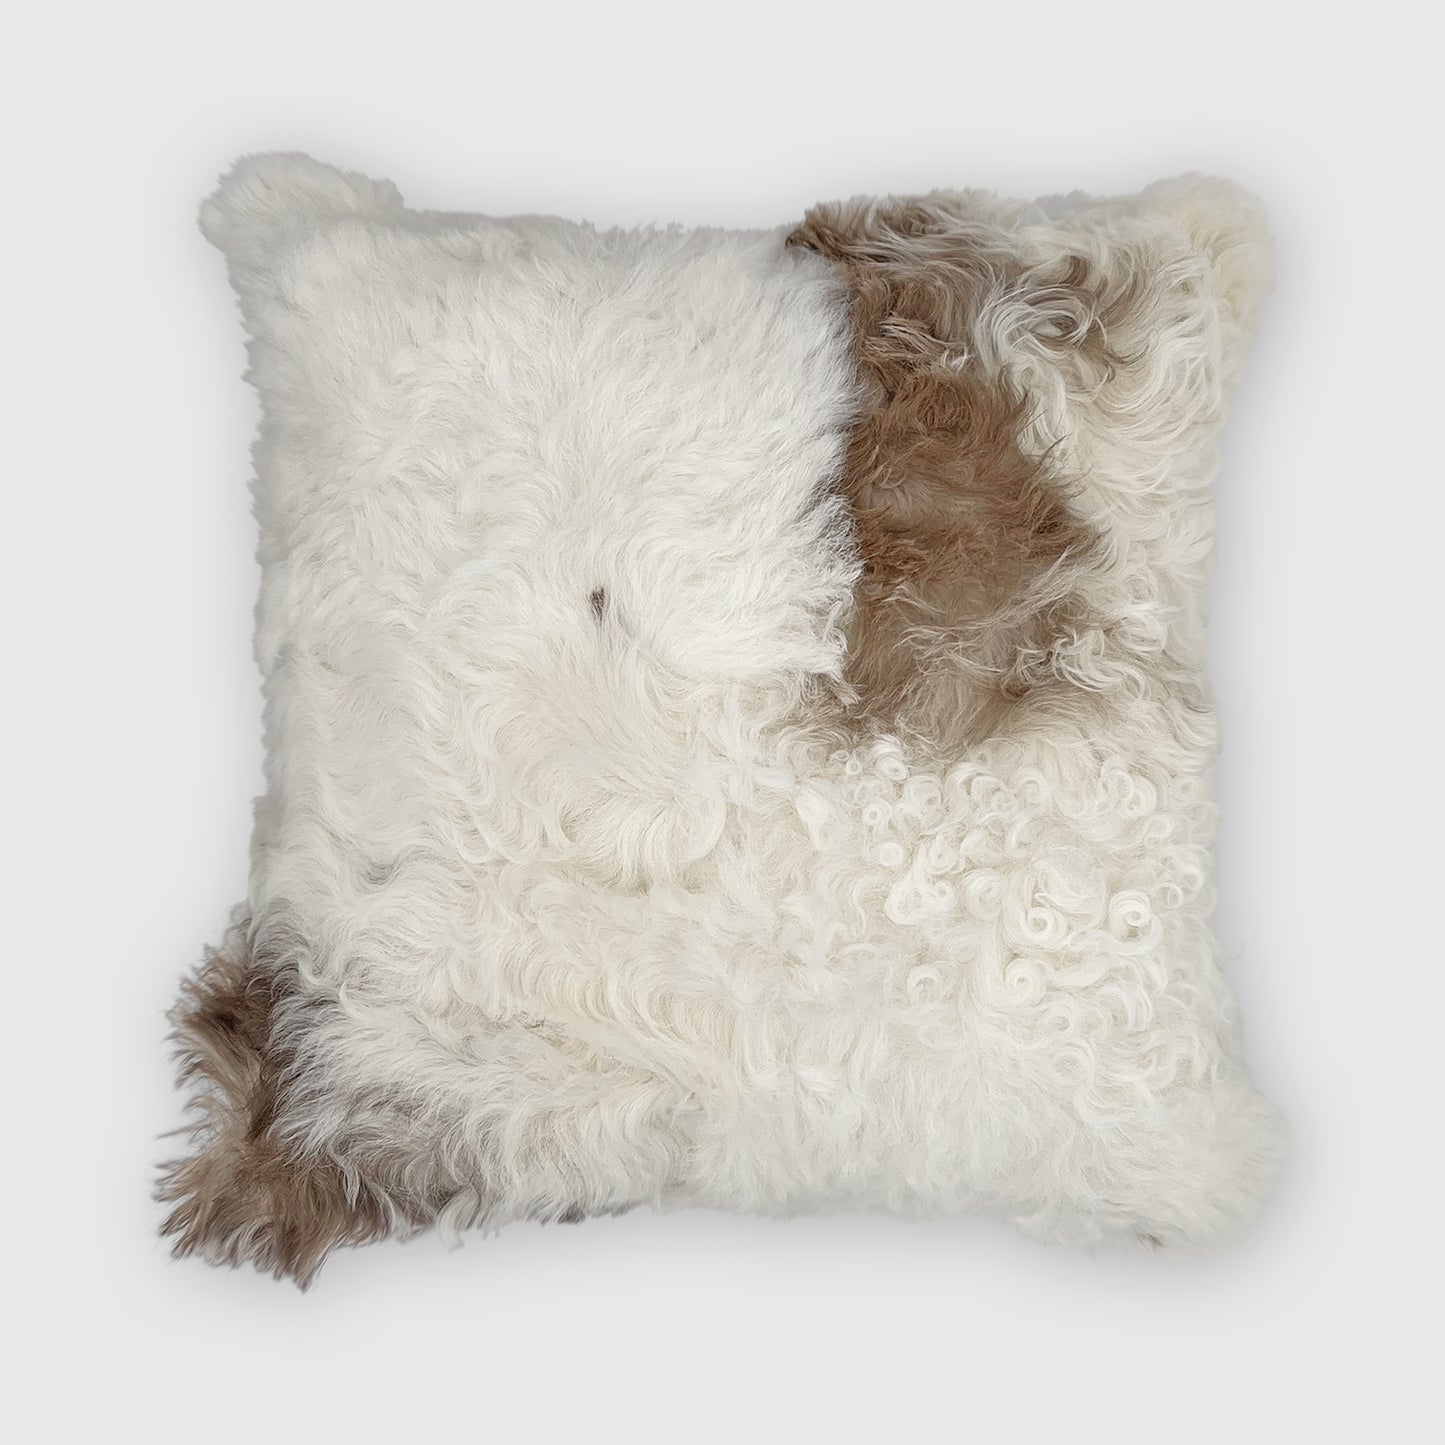 The Mood Tigrado Spanish Lambskin Patchwork Pillow, 18x18 in., Spotted Ivory